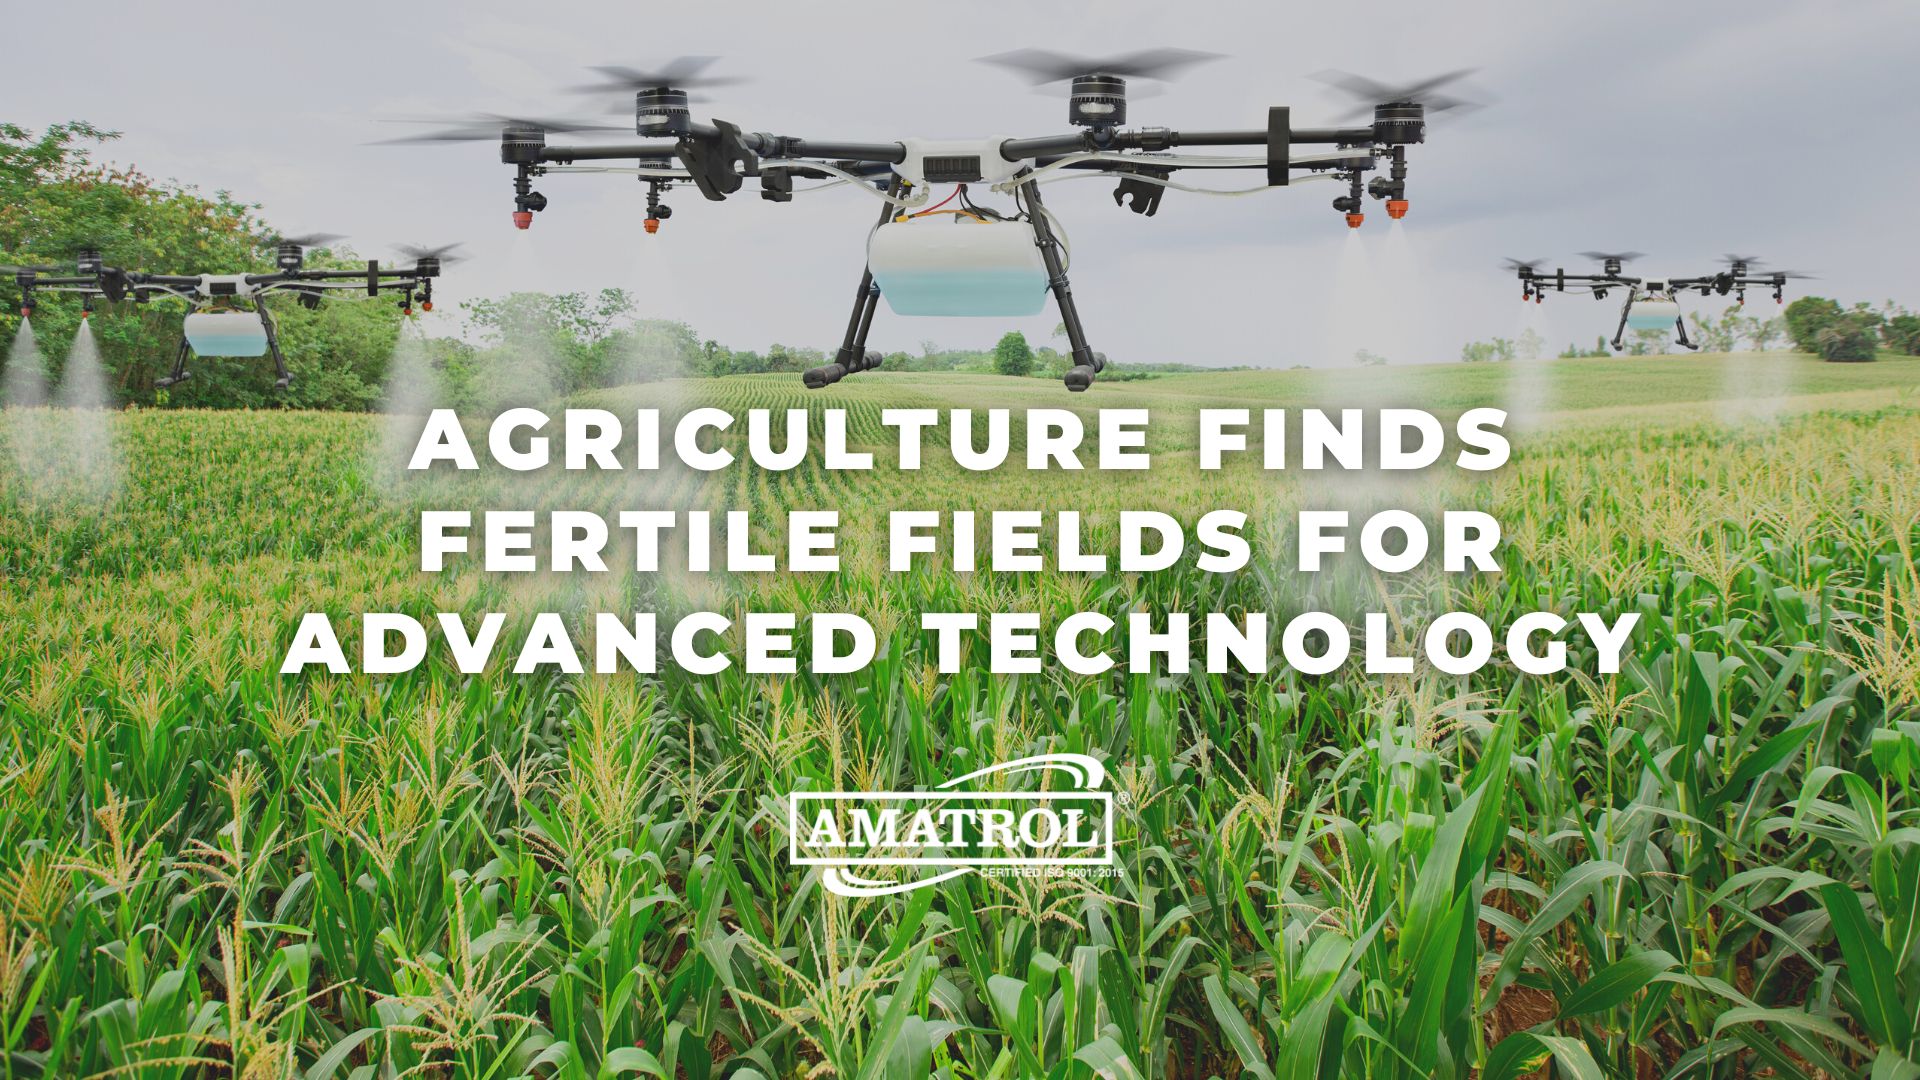 Amatrol - Agriculture Finds Fertile Fields for Advanced Technology 169